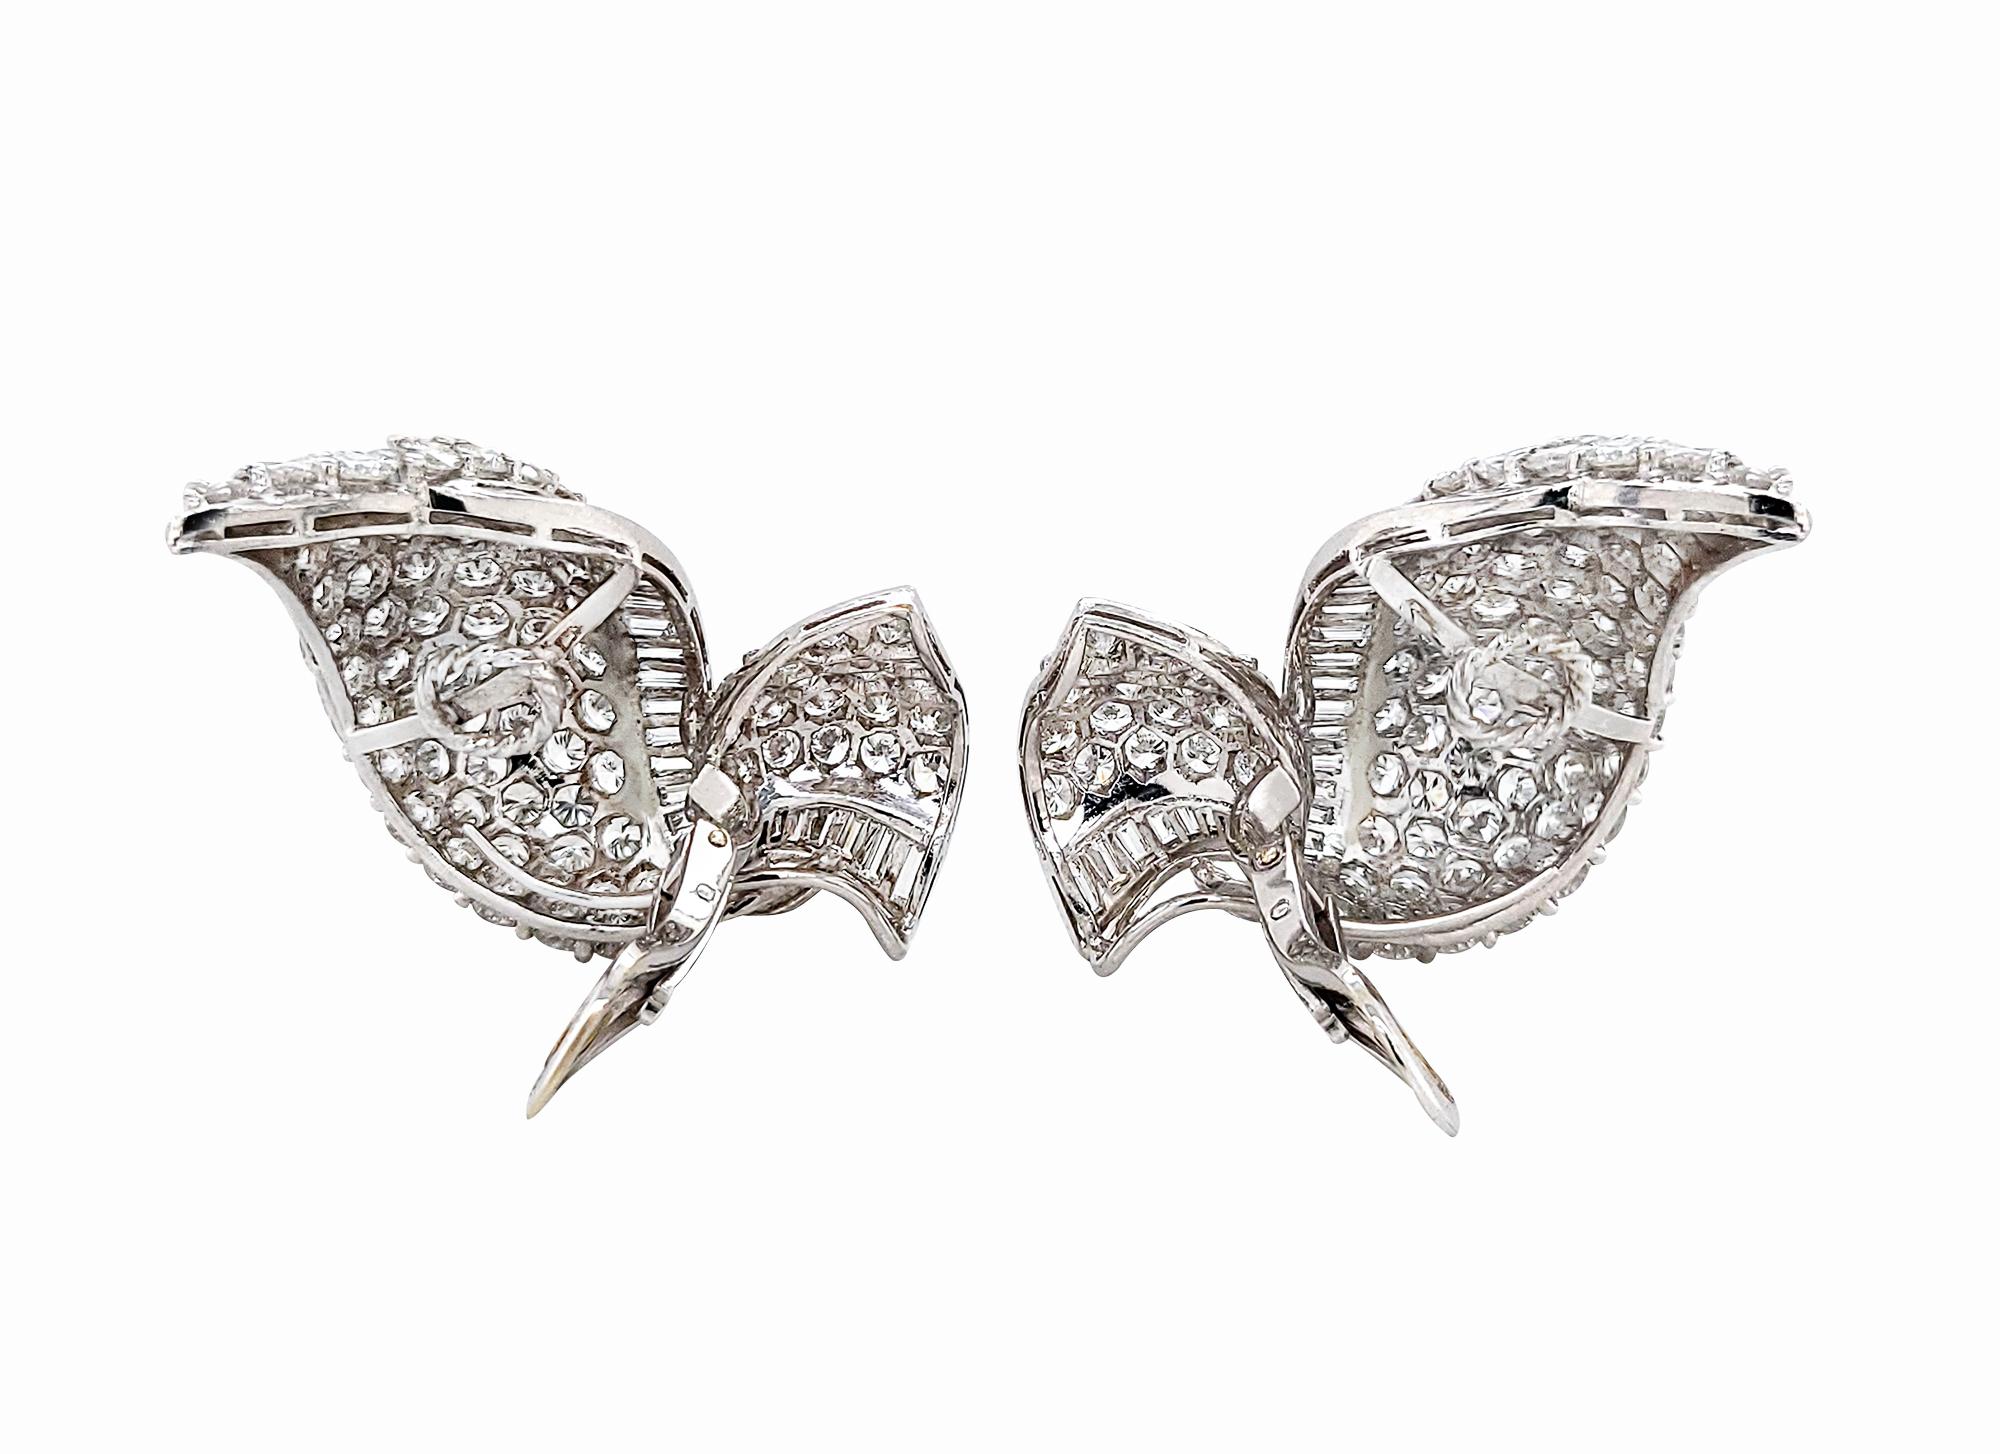 Introducing a pair of earrings crafted by Spectra Fine Jewelry in 2018, a brand renowned for its exquisite craftsmanship and attention to detail. These earrings are a true testament to Spectra Fine Jewelry's commitment to creating exceptional pieces